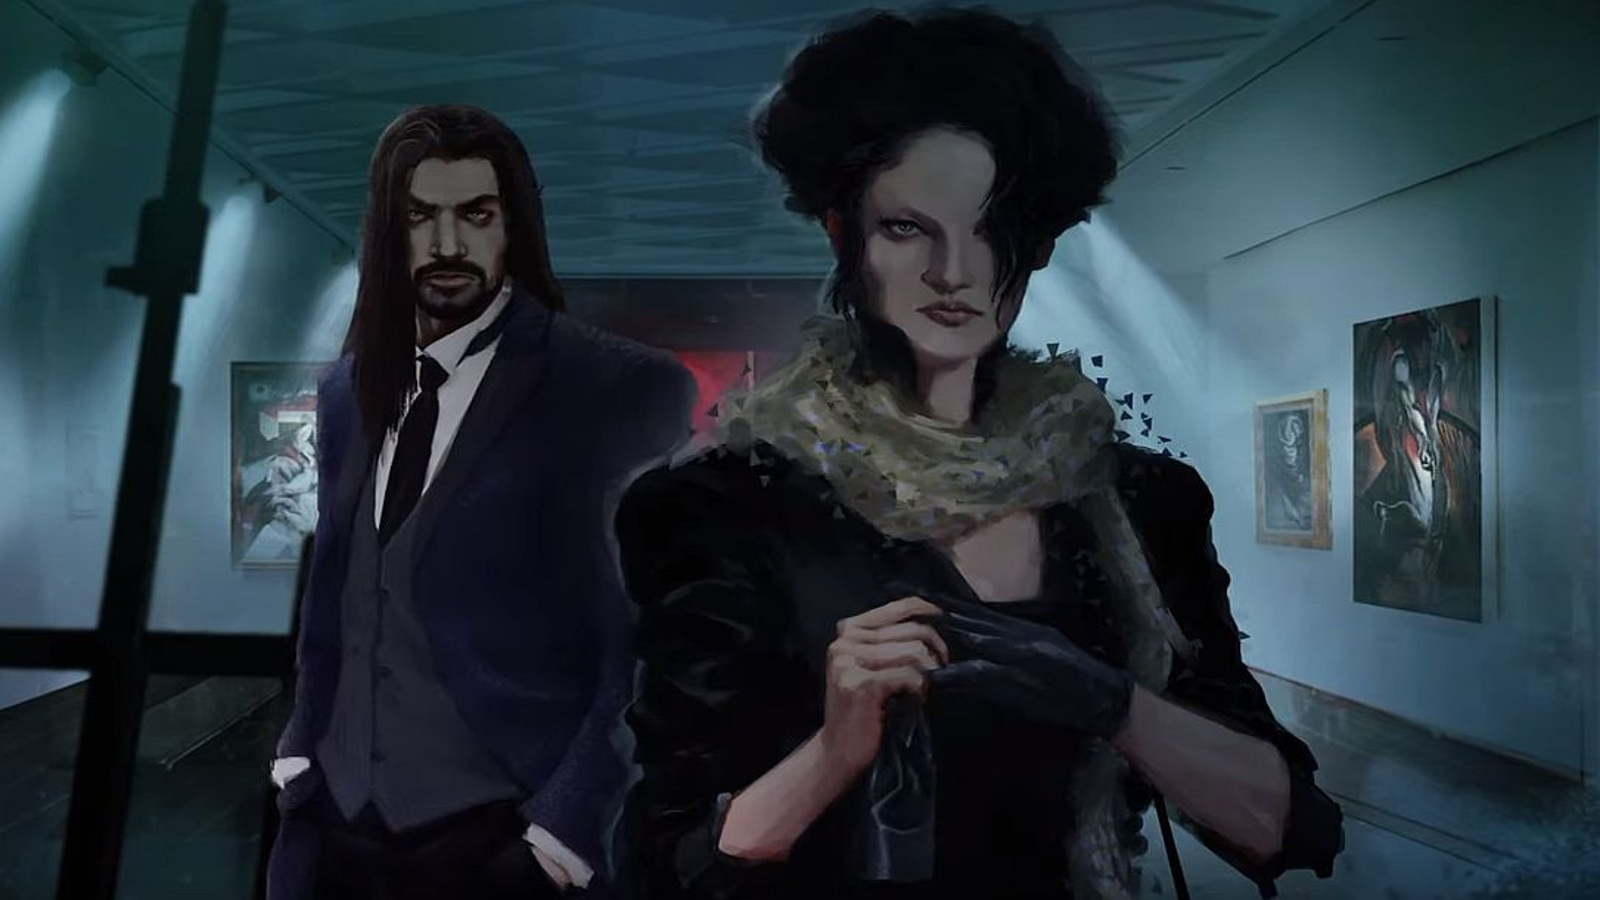 Vampire: The Masquerade – Coteries of New York is Coming to PC and